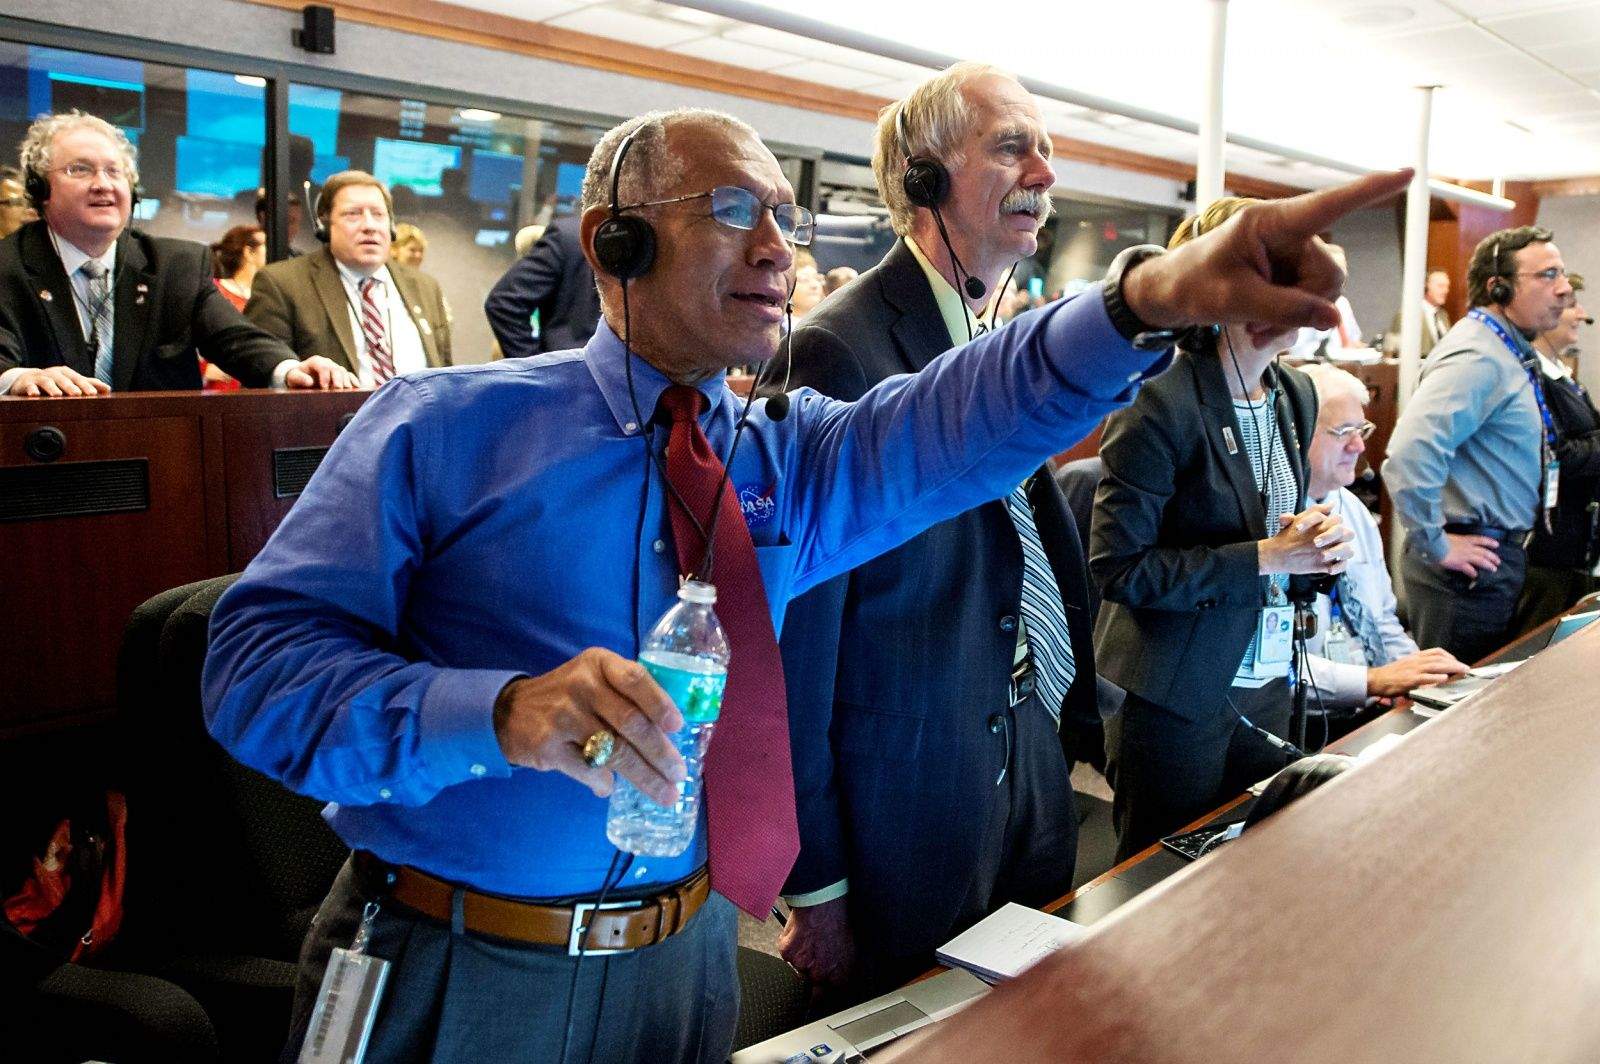 NASA Administrator Charles Bolden, left, NASA Associate Administrator for the Human Exploration and Operations Directorate William Gerstenmaier, and others in Building AE at Cape Canaveral Air Force Station, react as they watch the Orion spacecraft splash down in the Pacific Ocean a more than three hours after launching onboard a United Launch Alliance Delta IV Heavy rocket from Launch Complex 37, Friday, Dec. 5, 2014, Cape Canaveral, Florida. The Orion spacecraft orbited Earth twice, reaching an altitude of approximately 3,600 miles above Earth before landing. No one was aboard Orion for this flight test, but the spacecraft is designed to allow us to journey to destinations never before visited by humans, including an asteroid and Mars.
Photo: Bill Ingalls/NASA